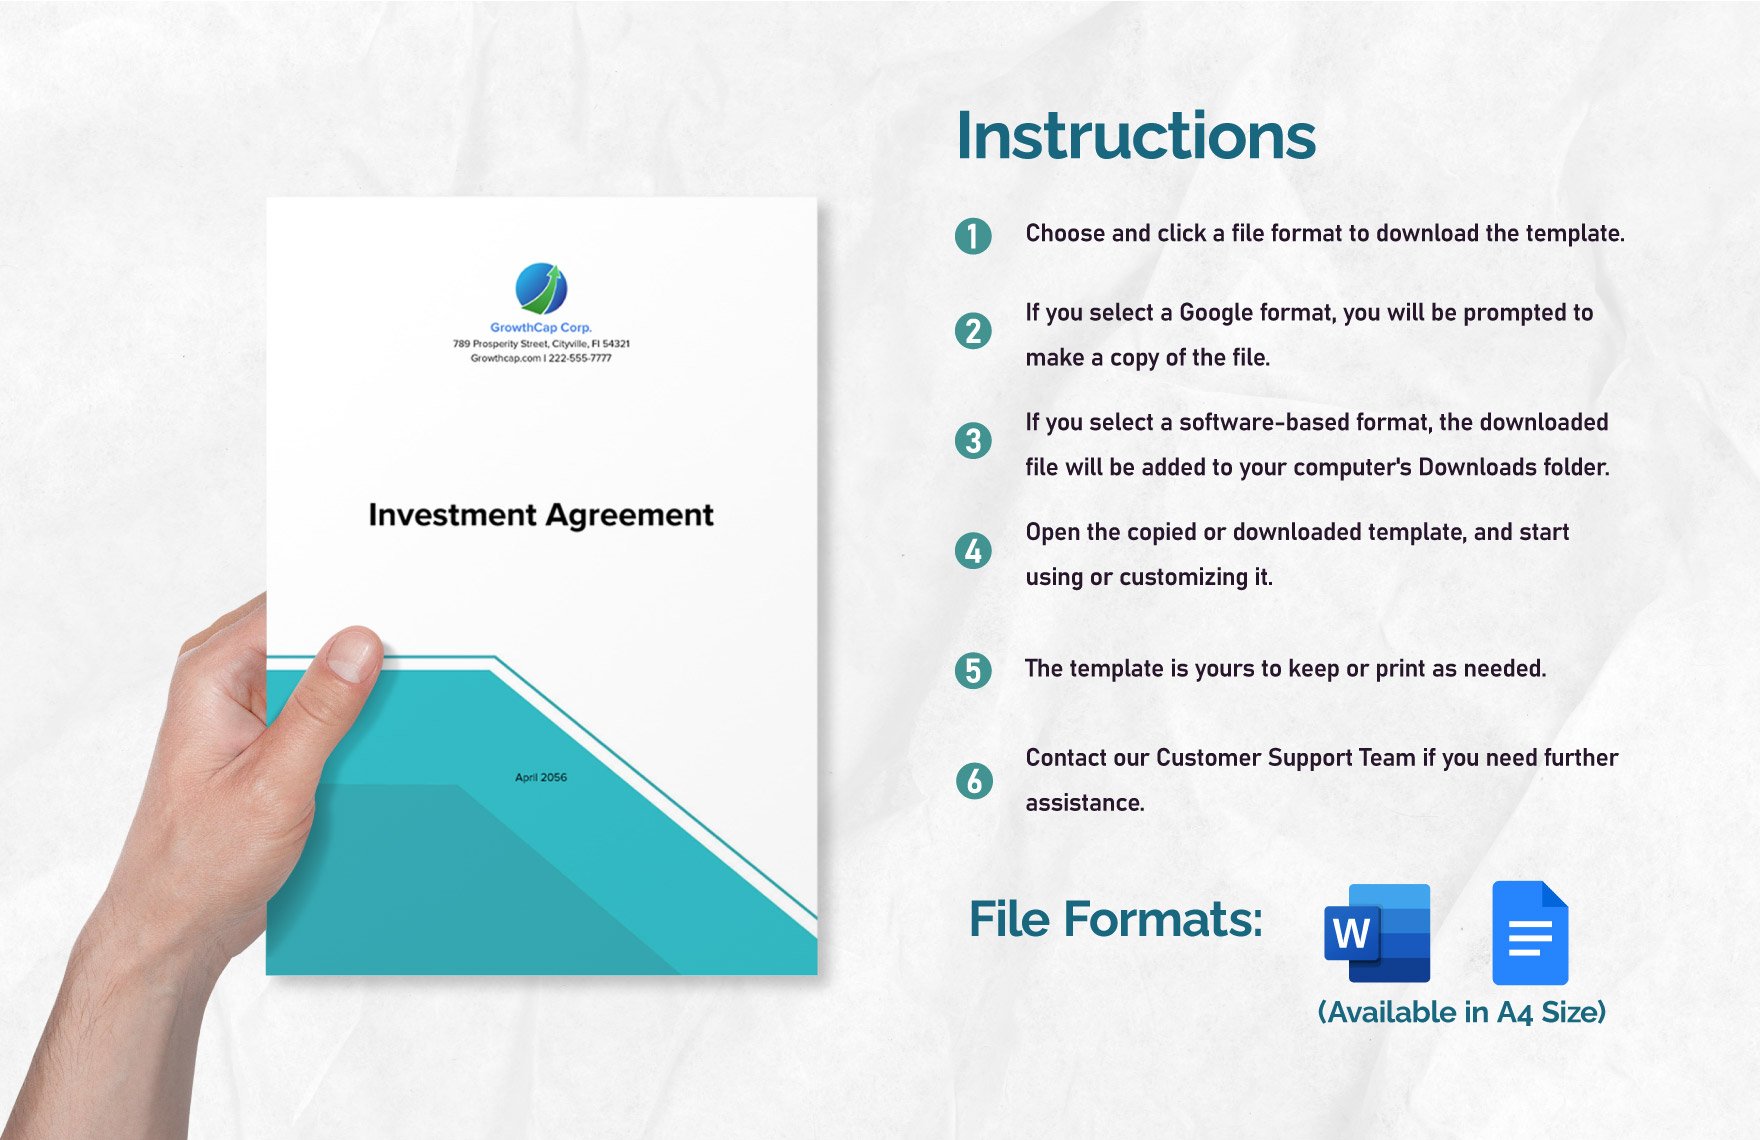 Potential Equity Investment Agreement Template